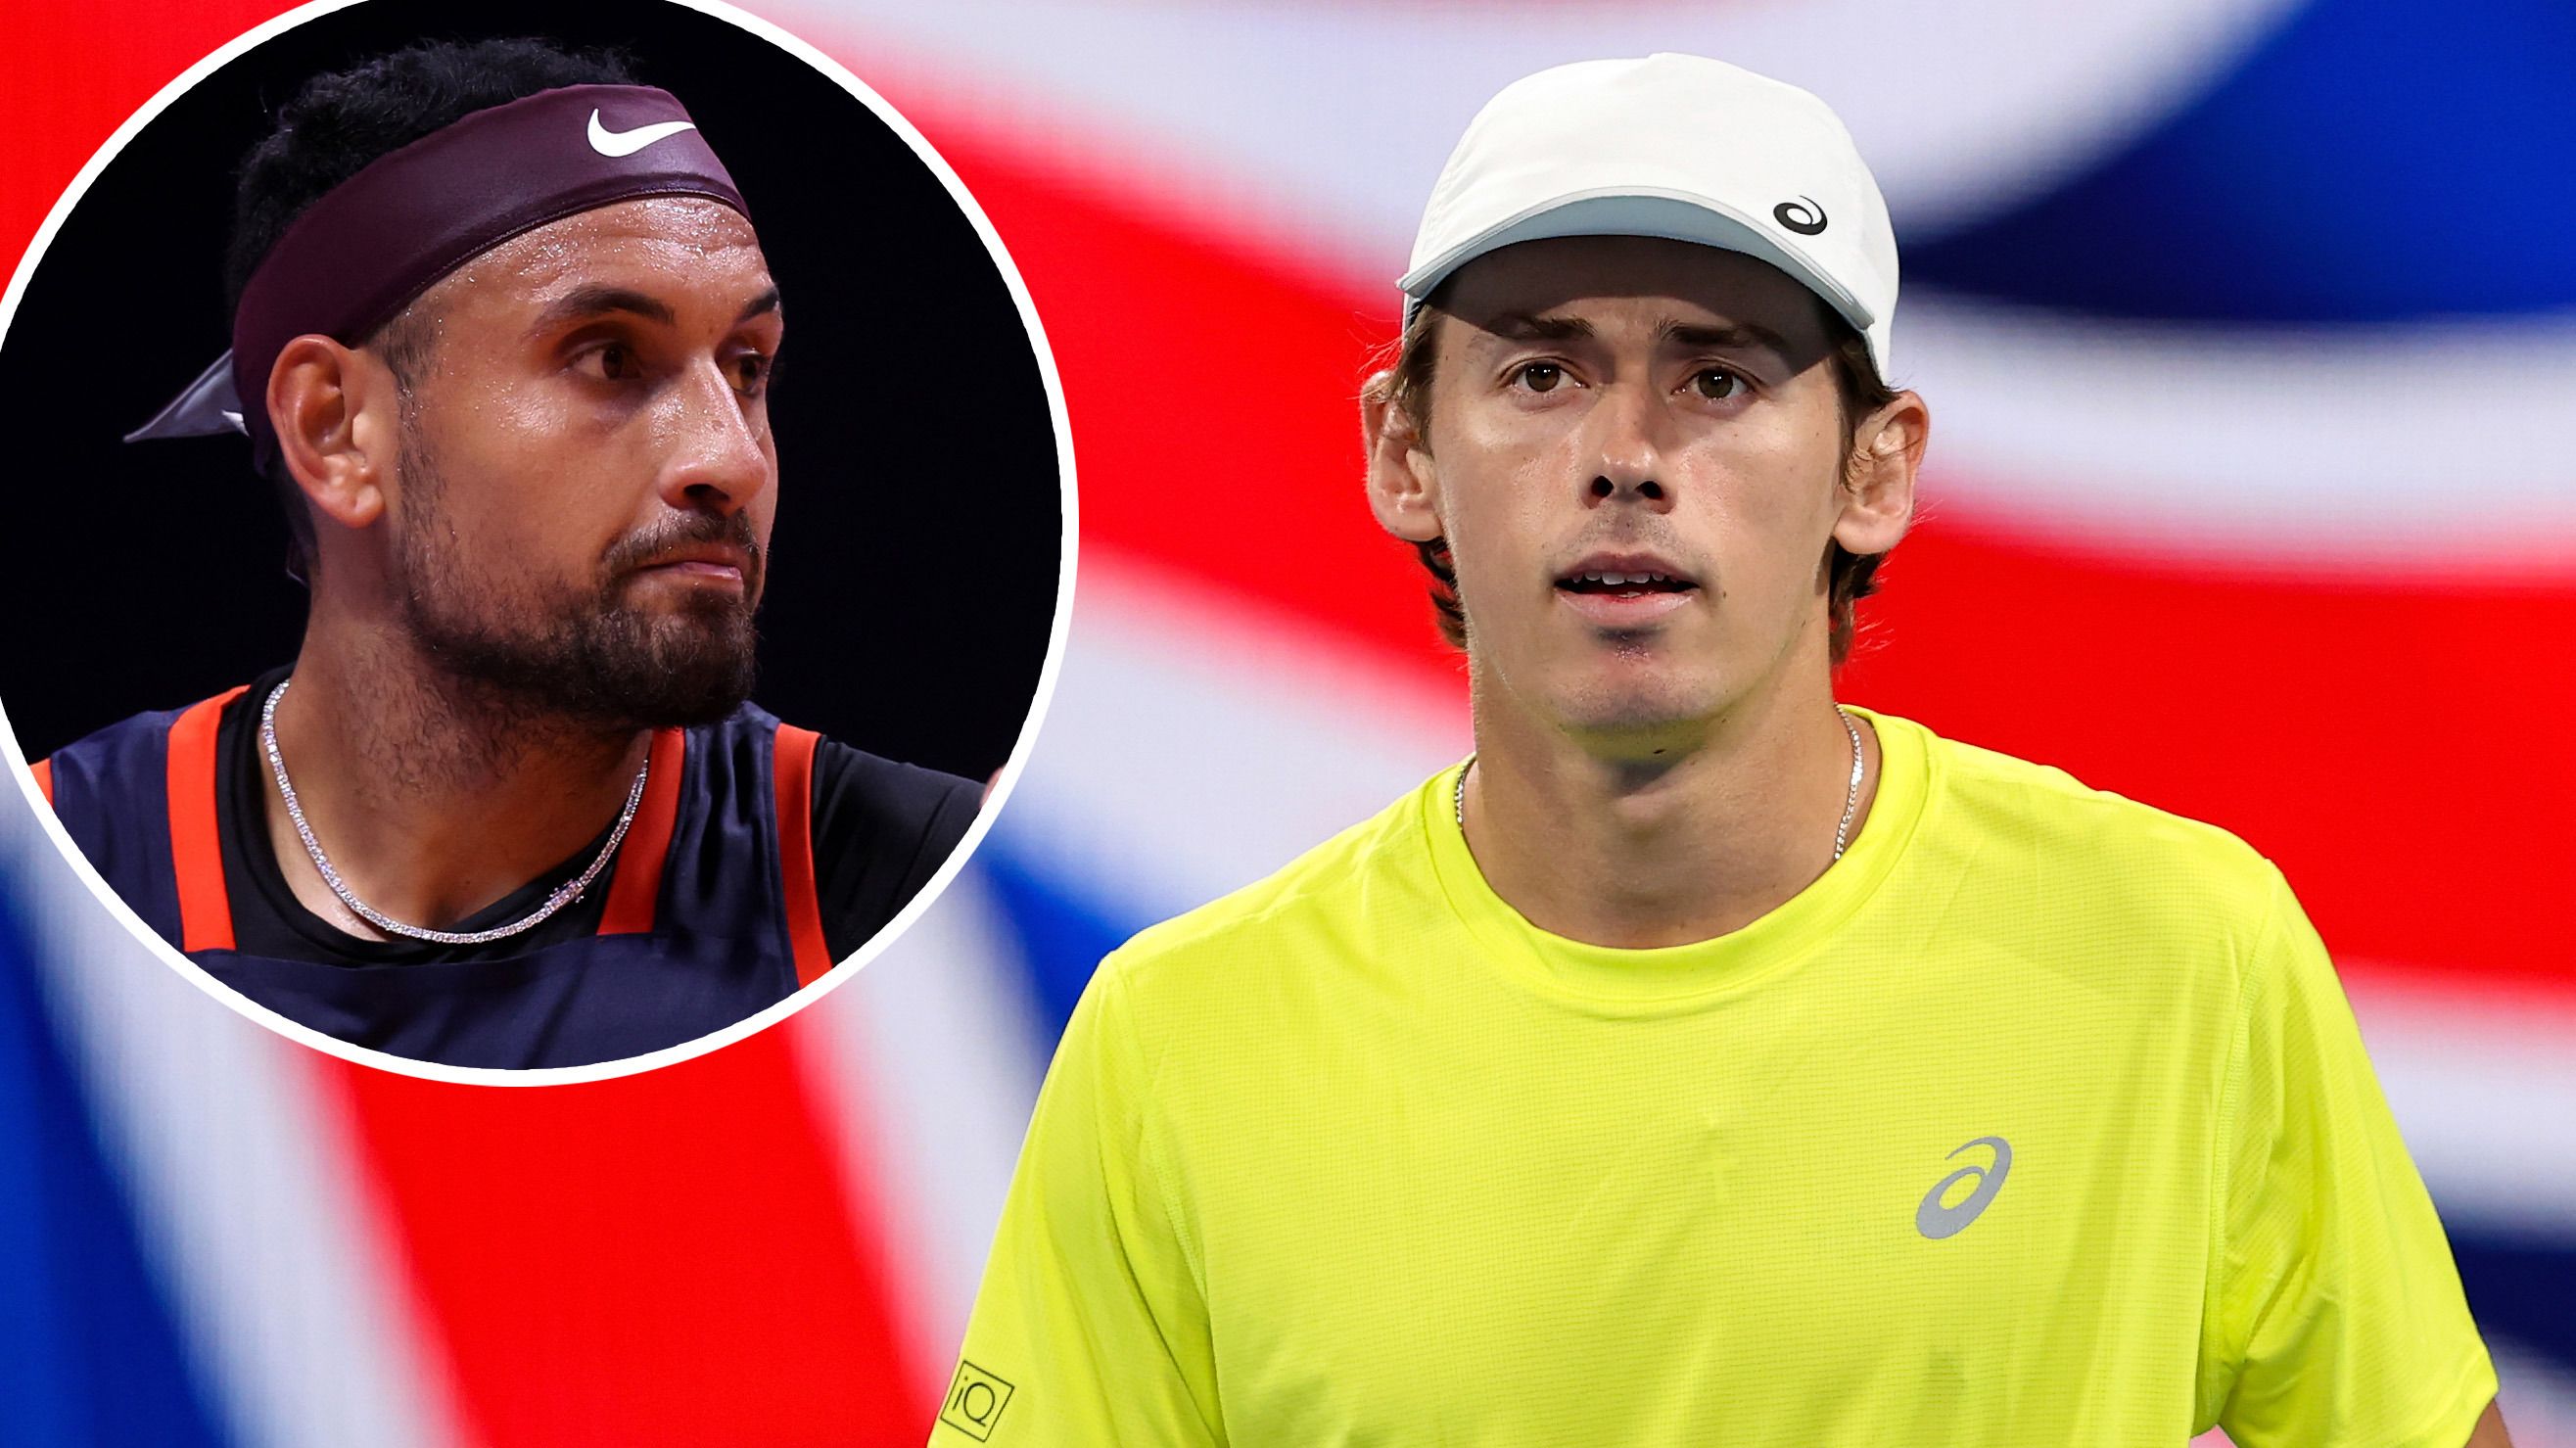 Alex de Minaur admits he and Nick Kyrgios have had little contact in Australian Open lead-up